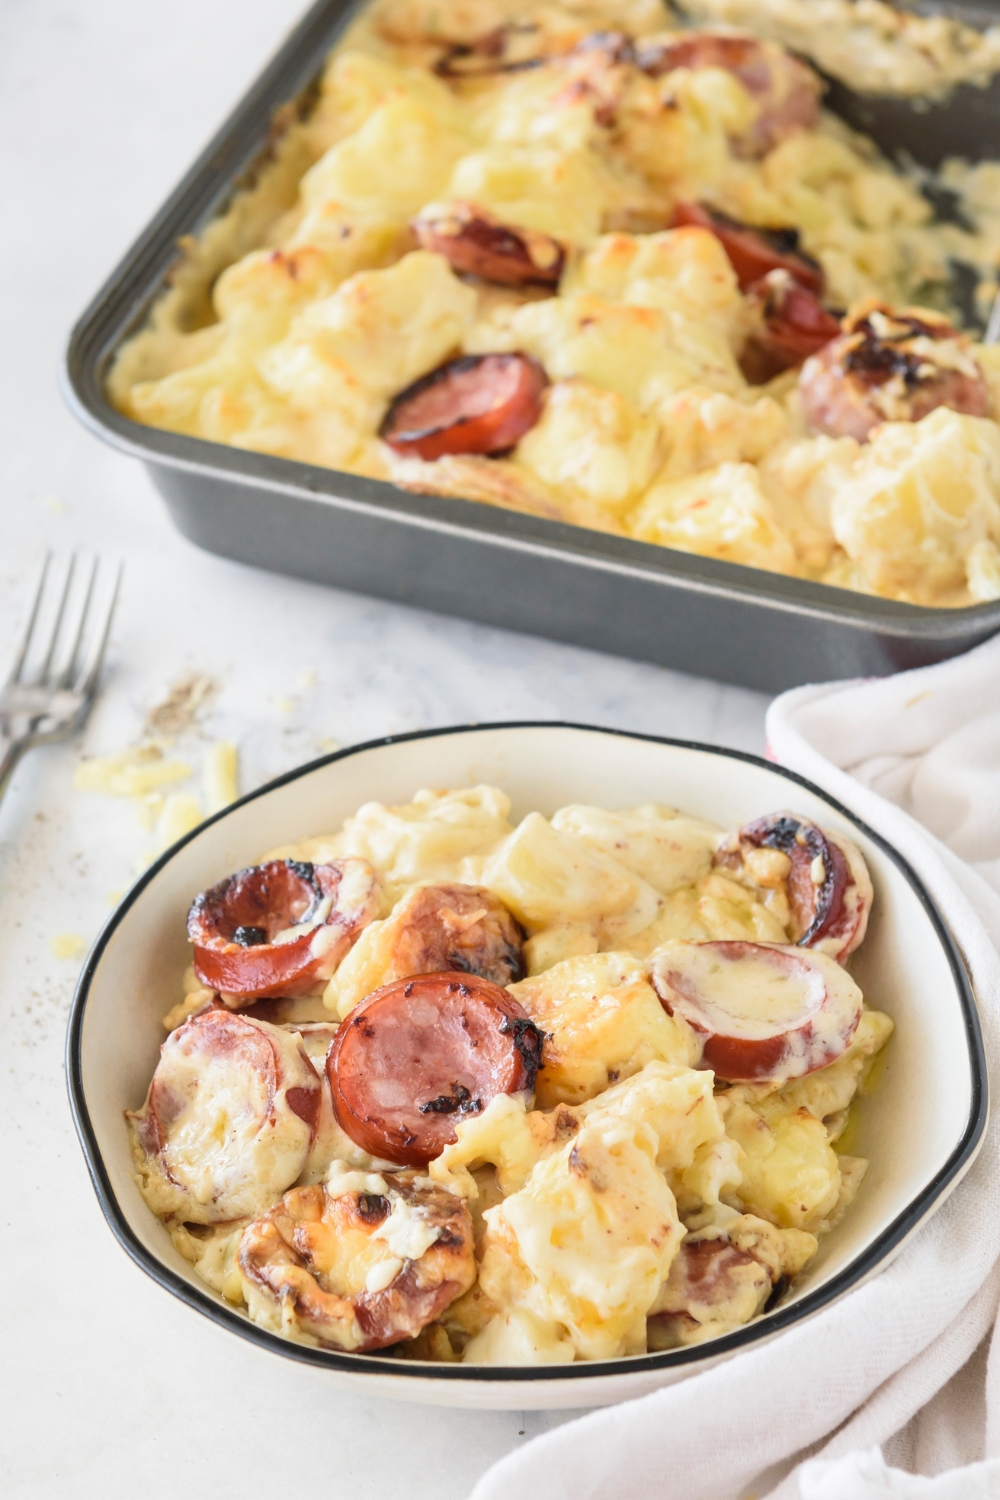 A bowl of kielbasa sausage casserole next to a baking dish filled with more casserole.